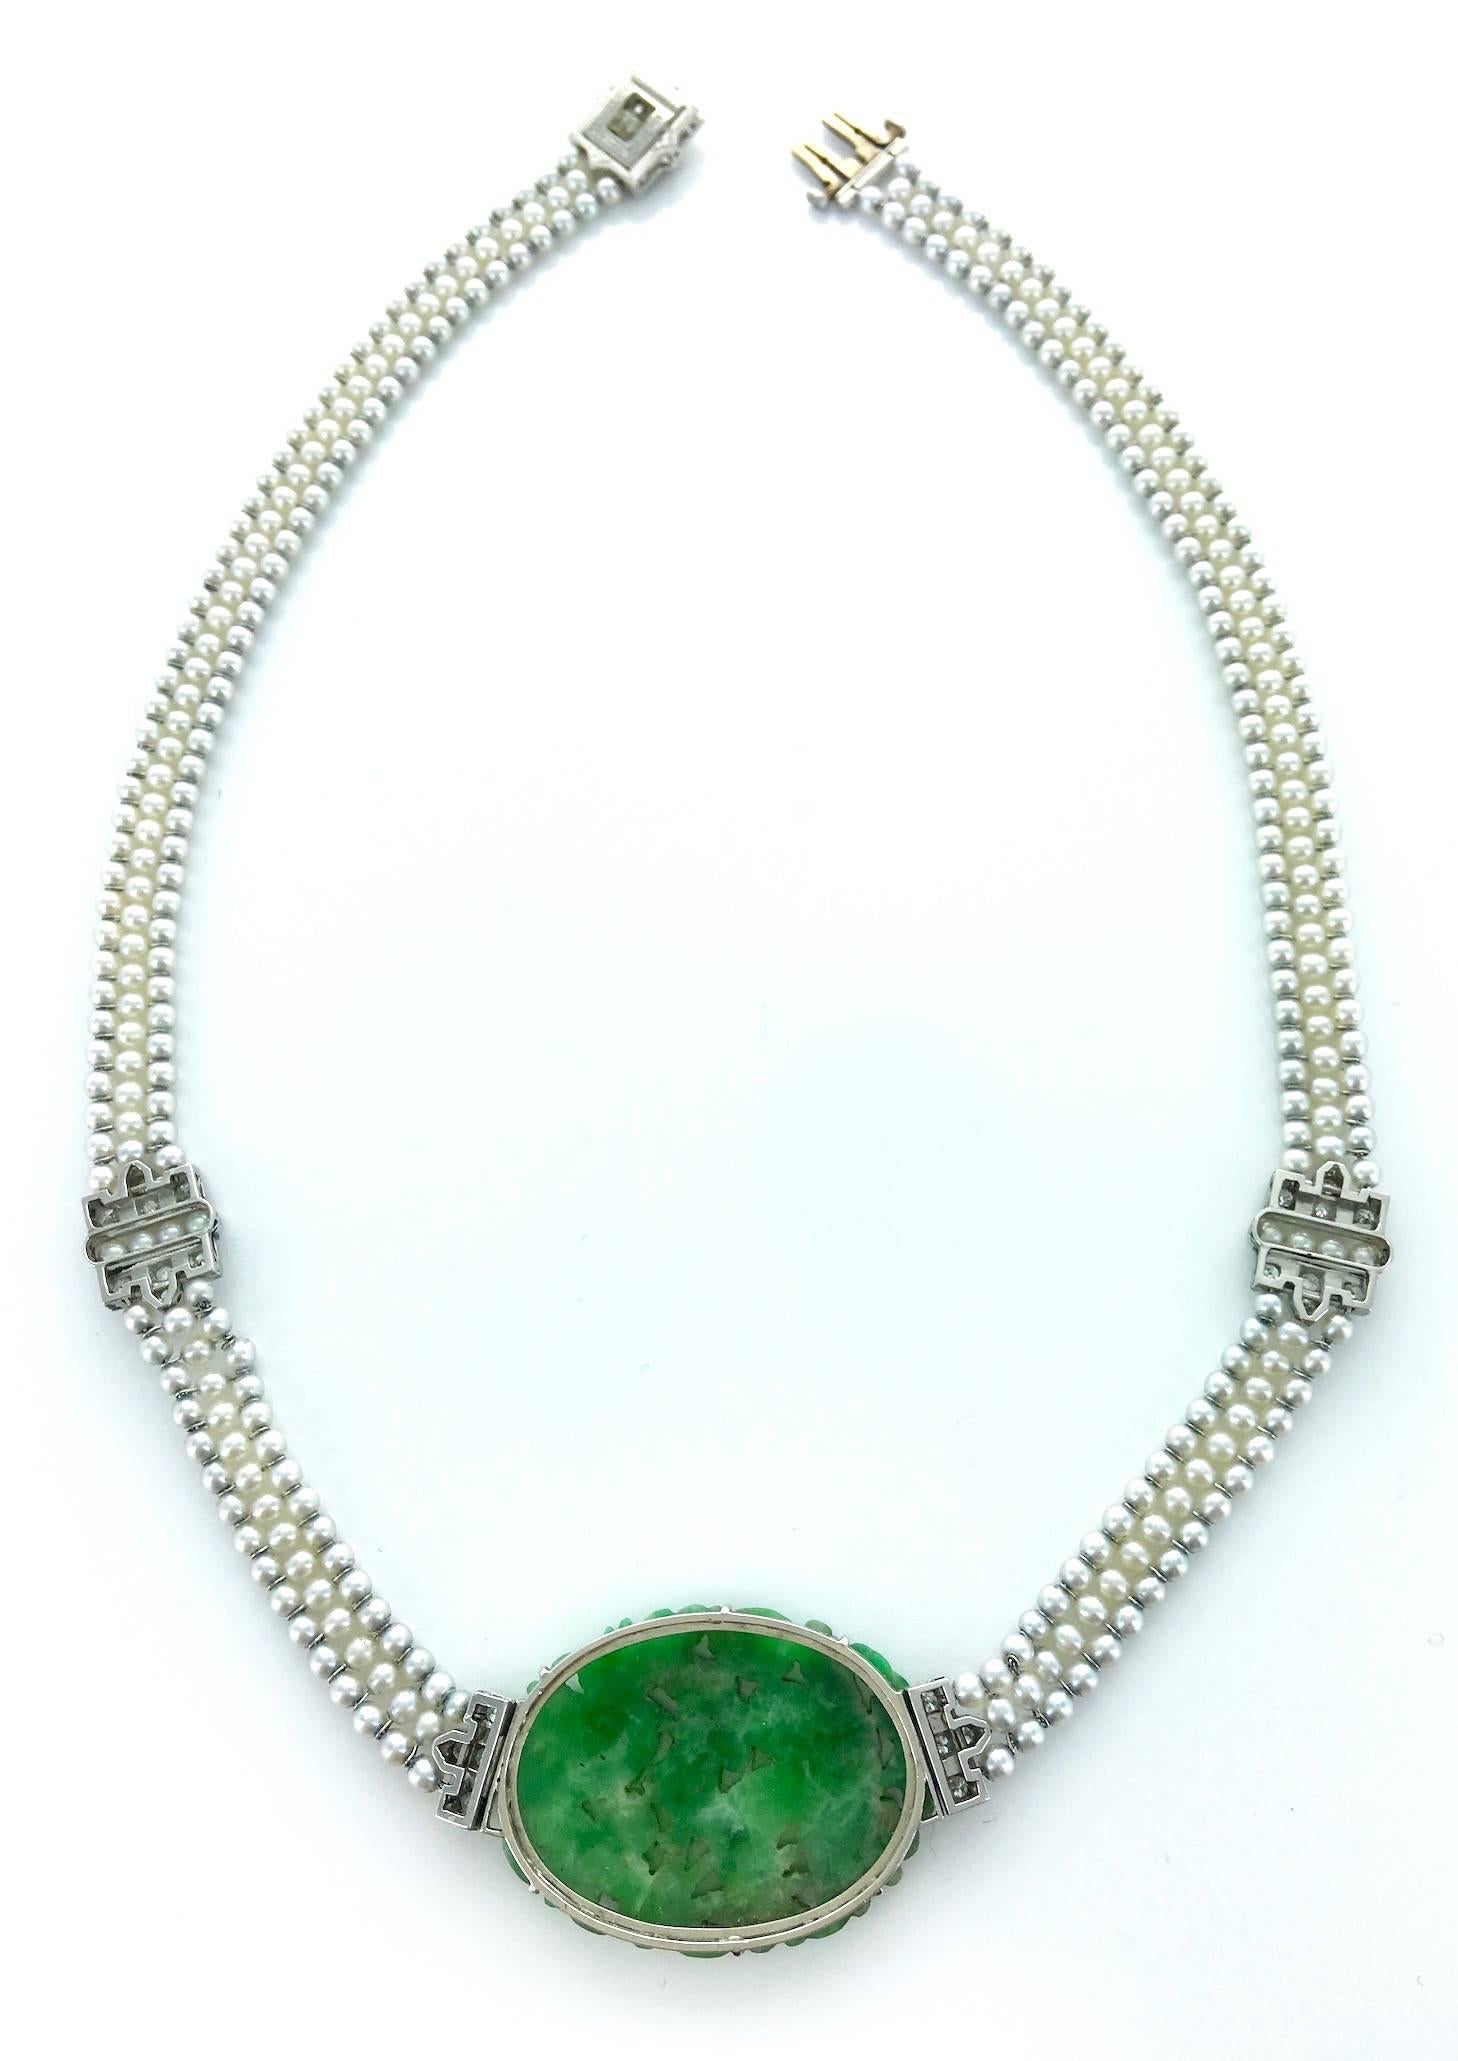 Art Deco Platinum and Natural Pearl Necklace with Diamond centered by an engraved Jade Nephrite.
Circa 1920.
Original fitted box.

Gross weight: 23.54 grams.